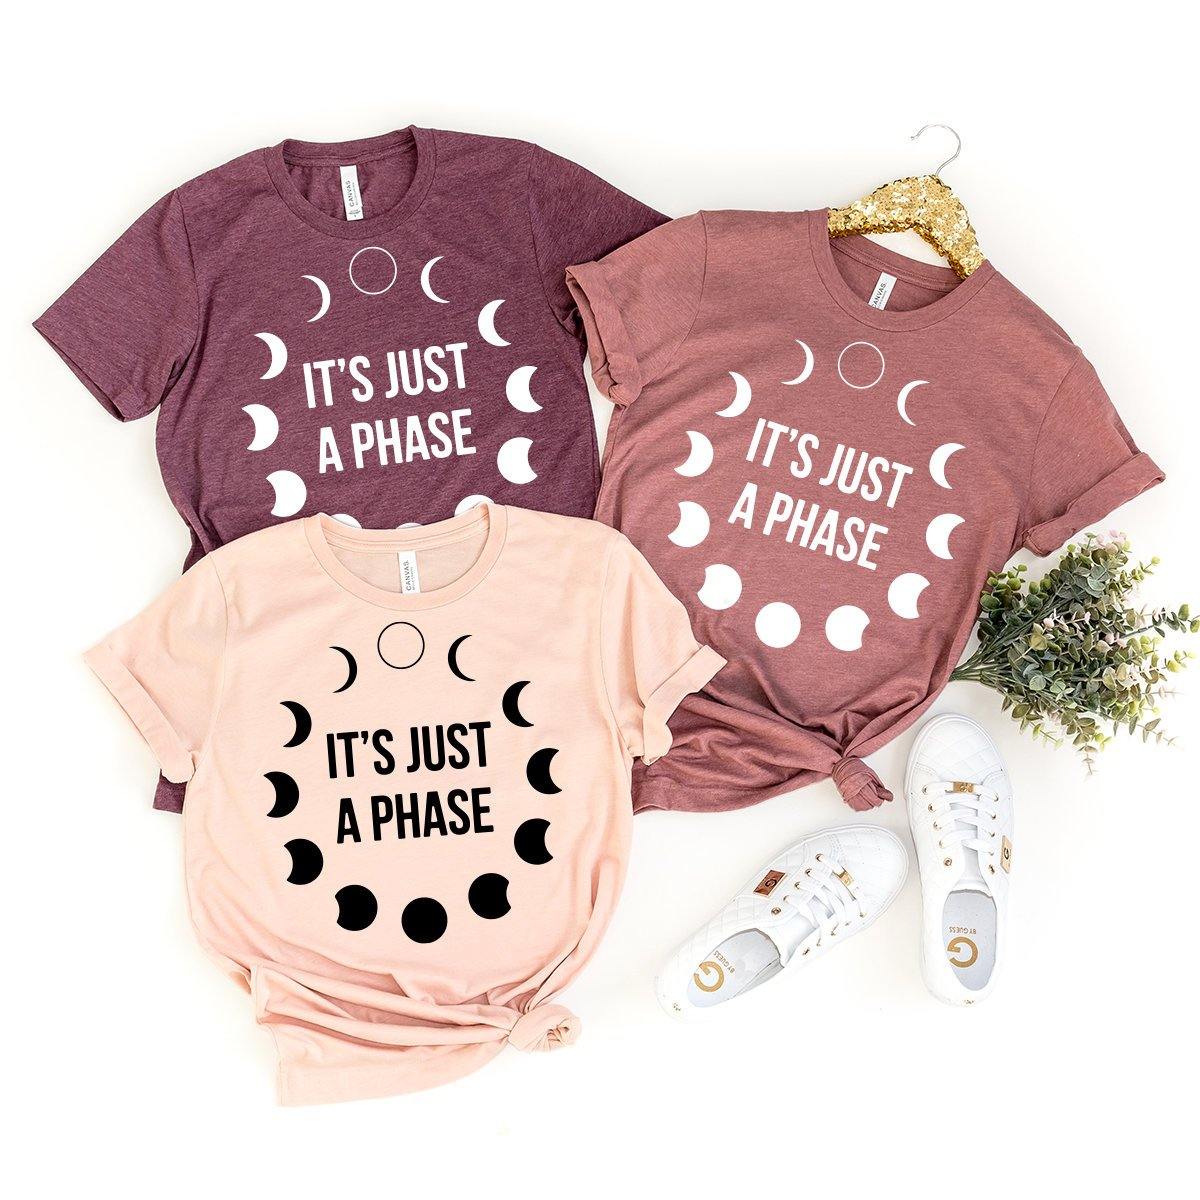 Funny Astrology Shirt, Moon Phases Shirt, It's Just A Phase Shirt, Moon Shirts, Astronomy T-Shirt, Phases Of The Moon Tee, Celestial Shirt - Fastdeliverytees.com